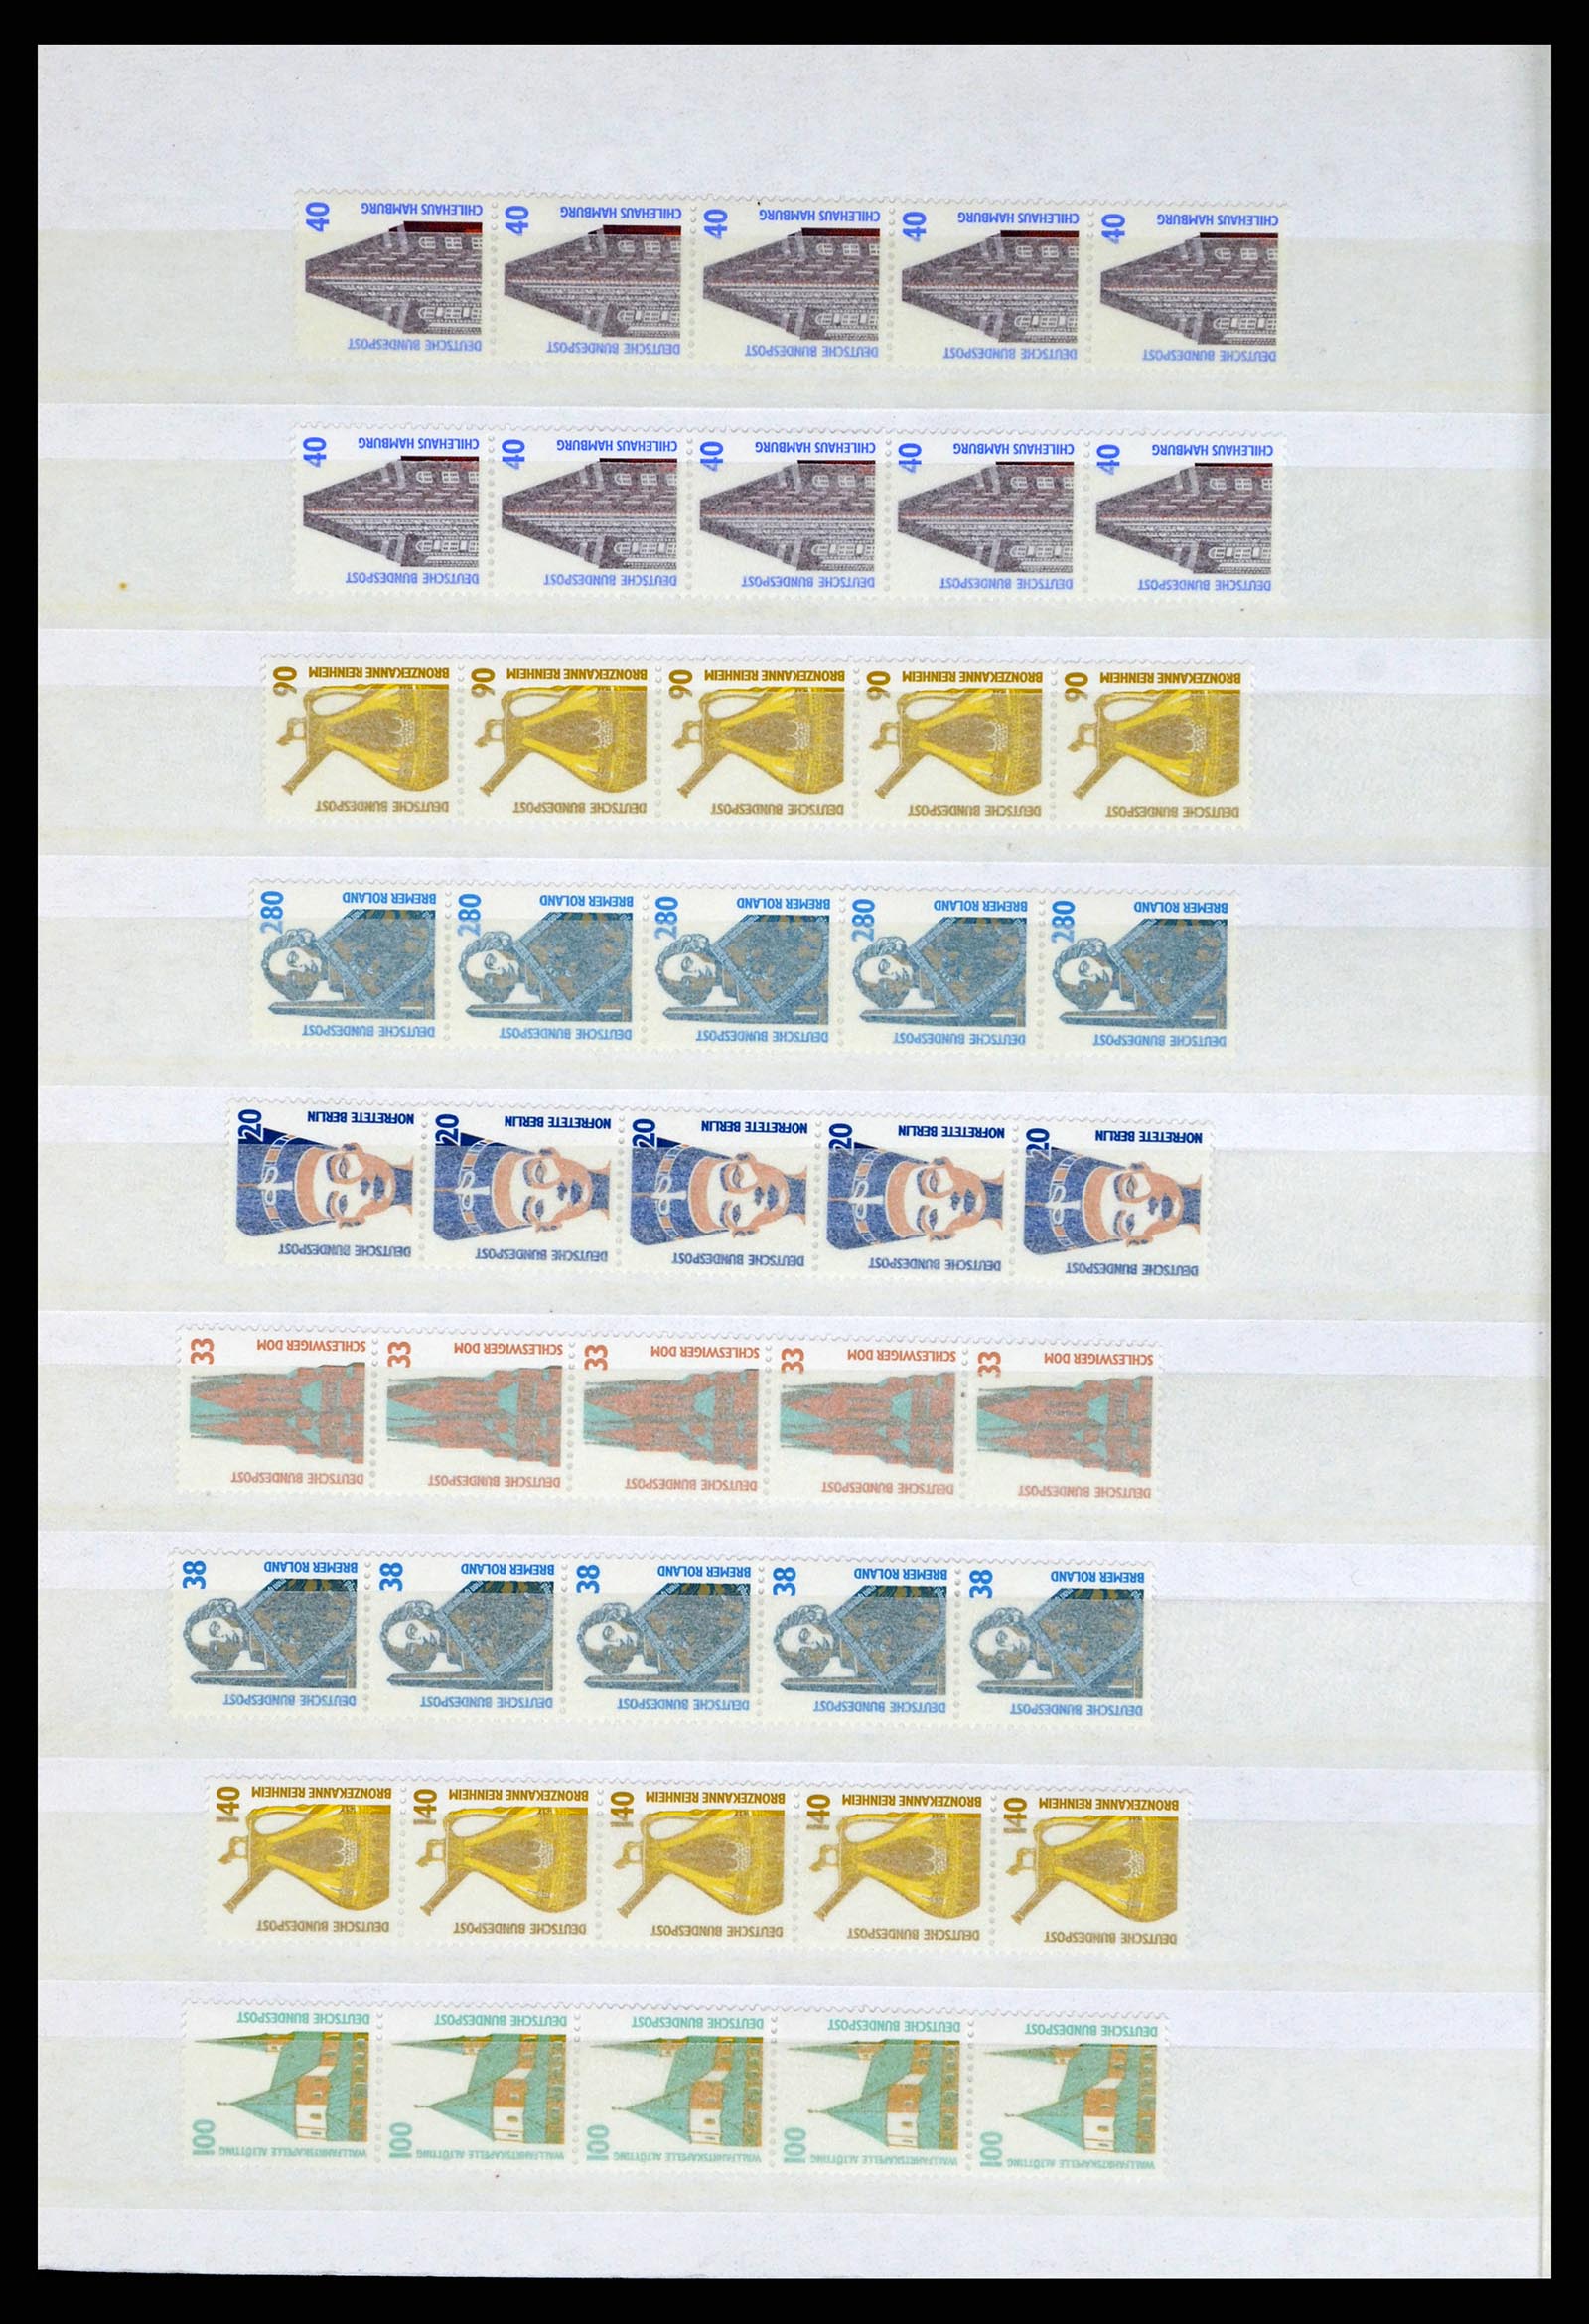 37354 072 - Stamp collection 37354 Bundespost and Berlin 1955-2000.